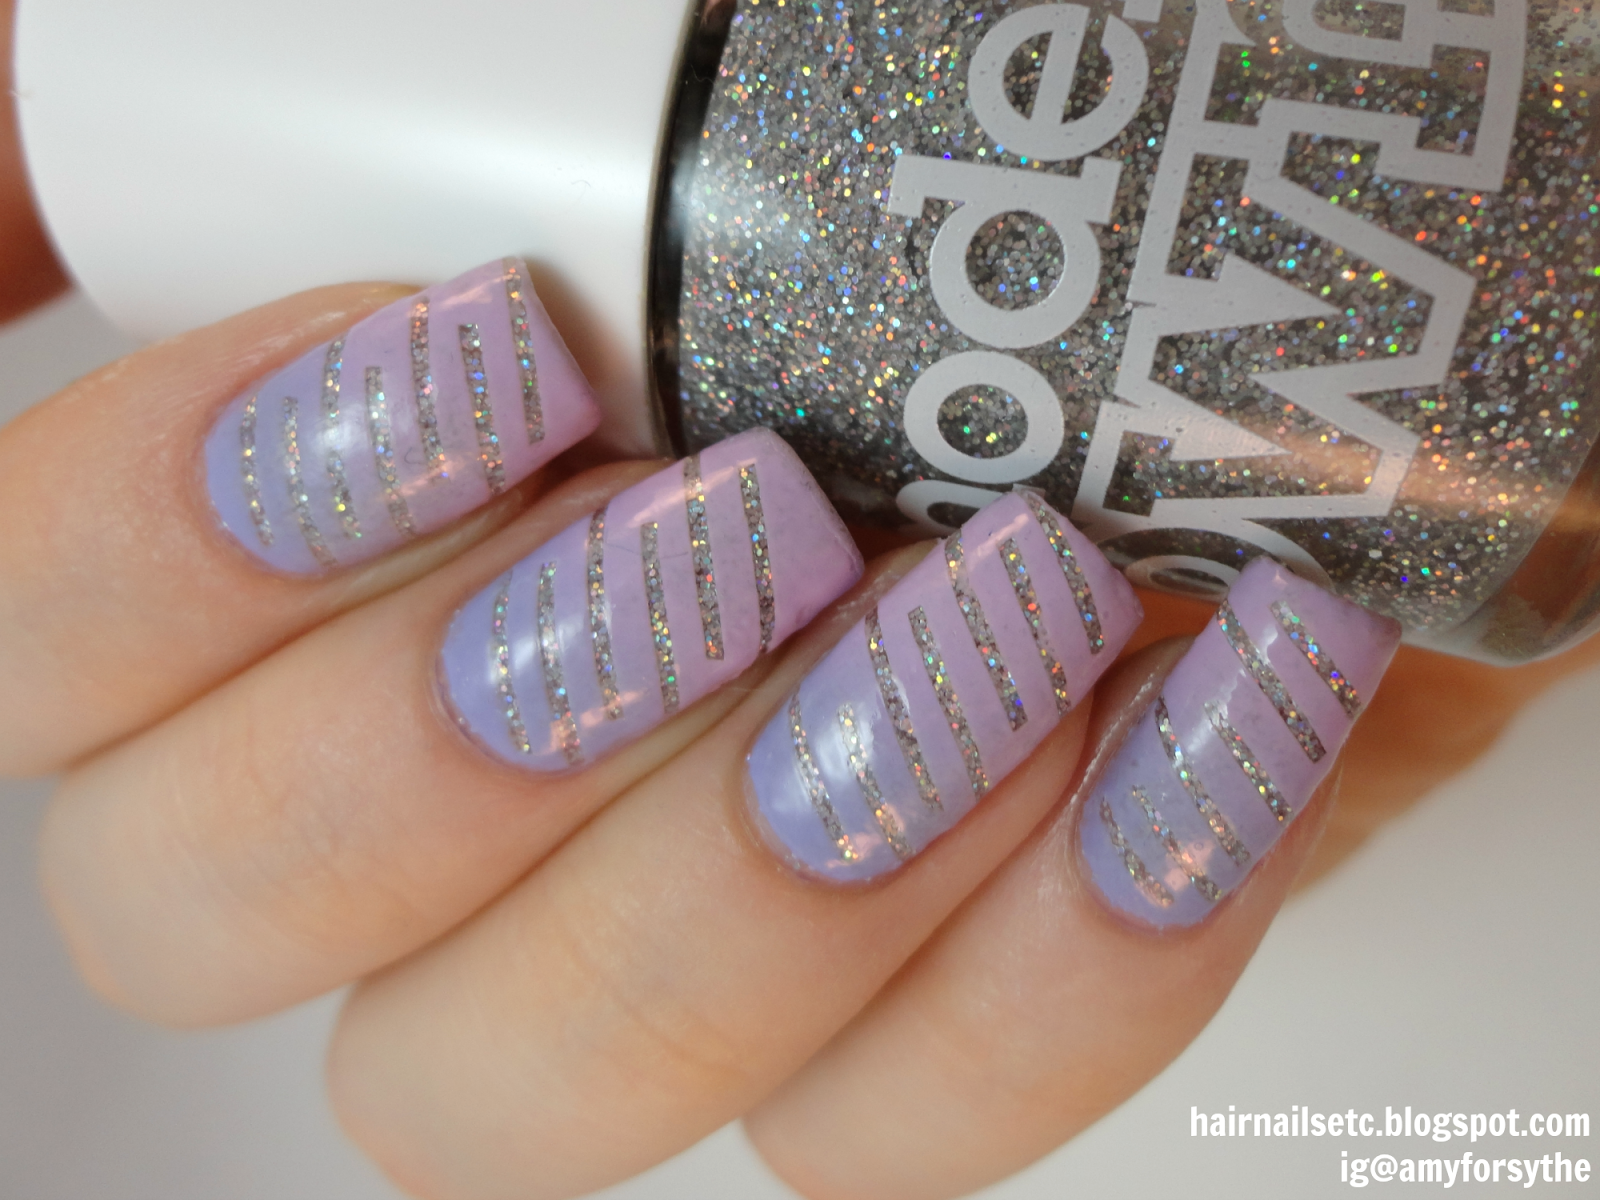 Glitter Stripe and Lilac Ombre Nail Art with Models Own Juicy Jules - hairnailsetc.blogspot.co.uk